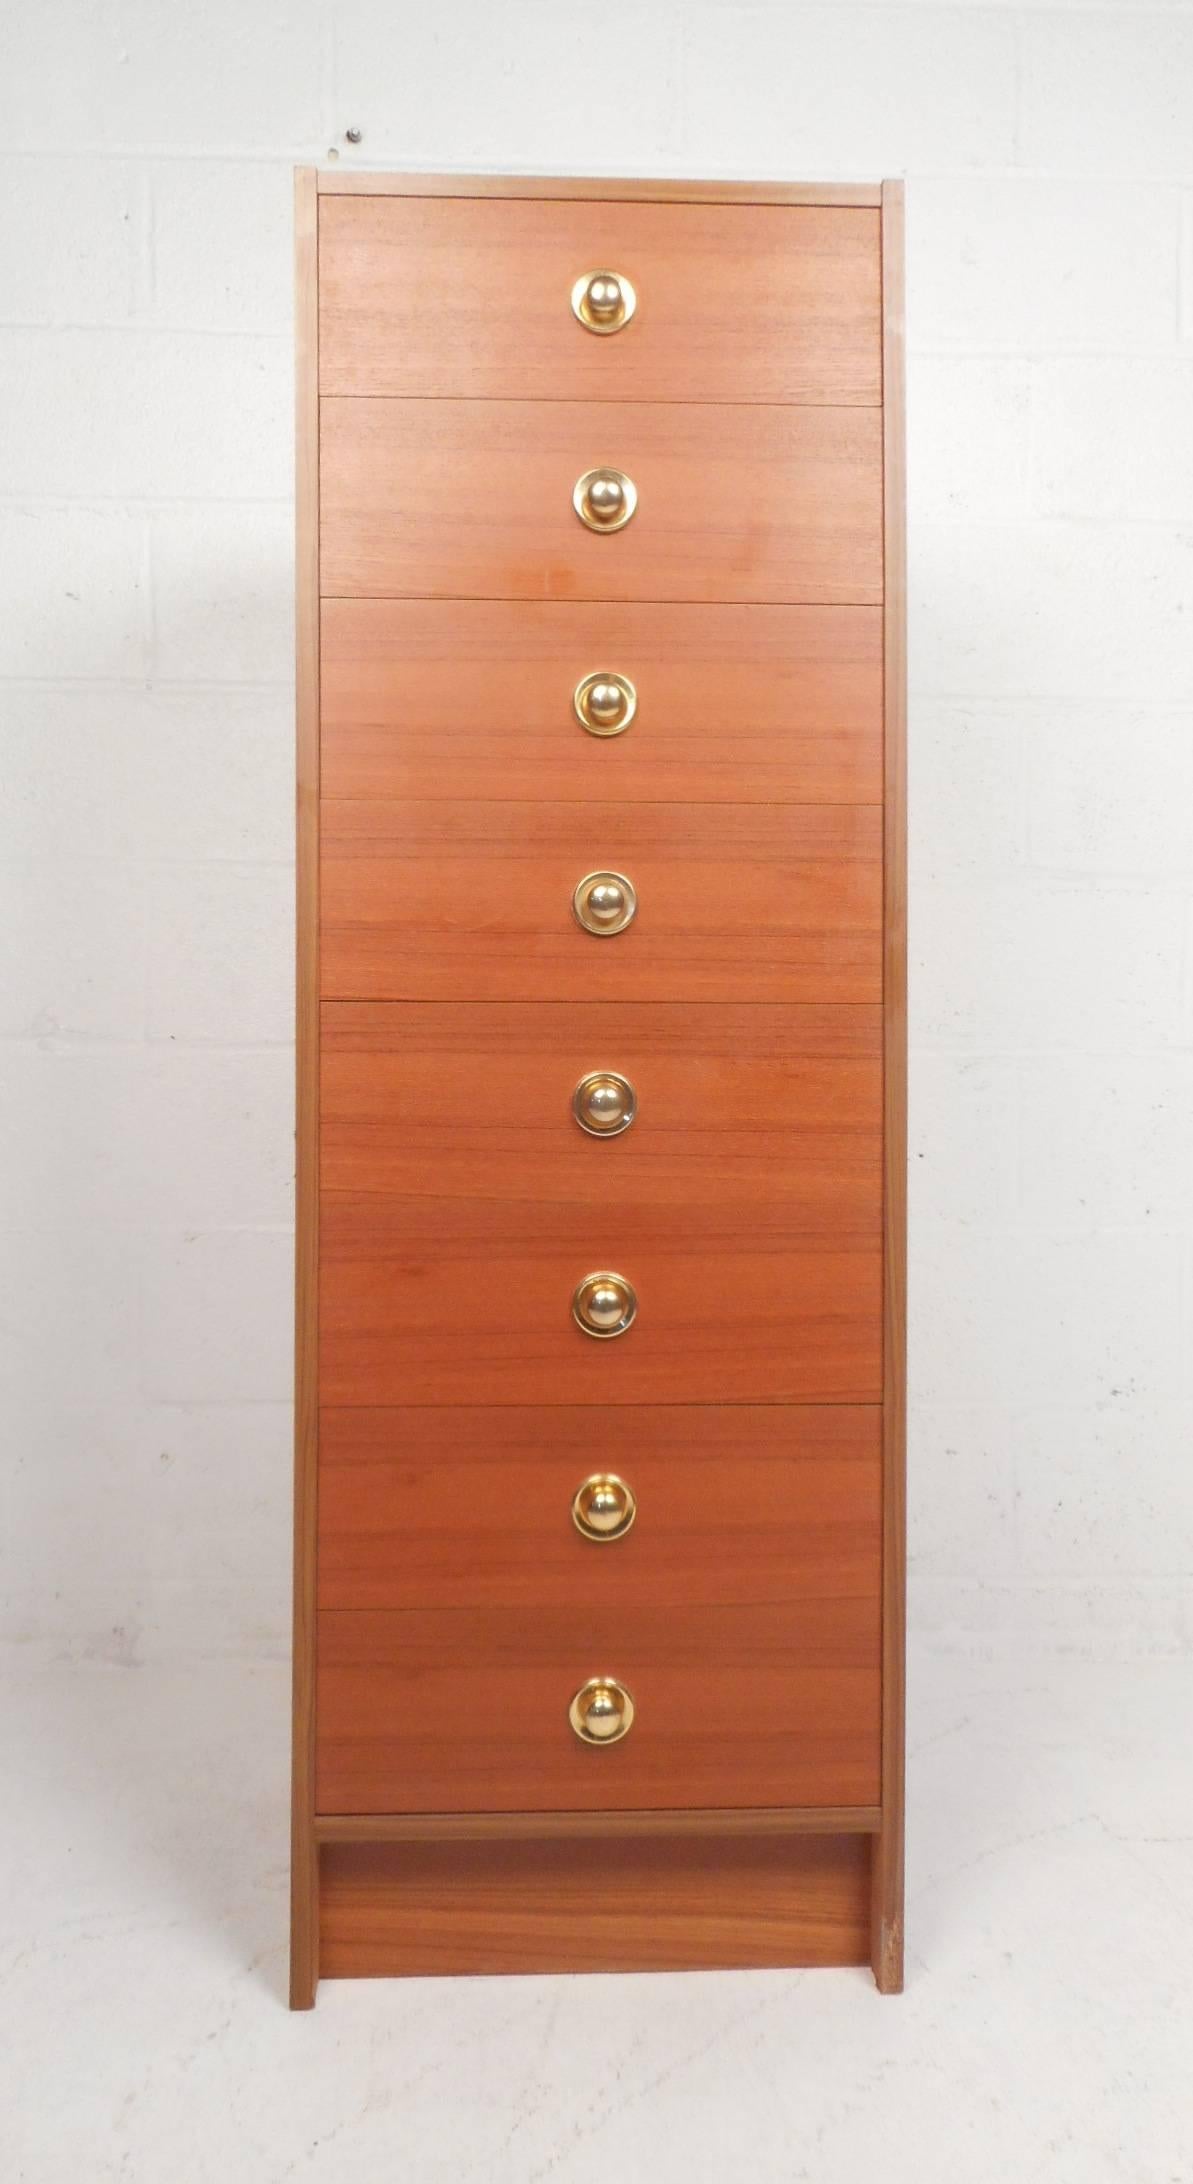 This stylish eight drawer tall chest will make the perfect addition to any modern interior. The unique circular metal drawer pulls and elegant wood grain throughout shows quality craftsmanship. An excellent method for storing plenty of items without